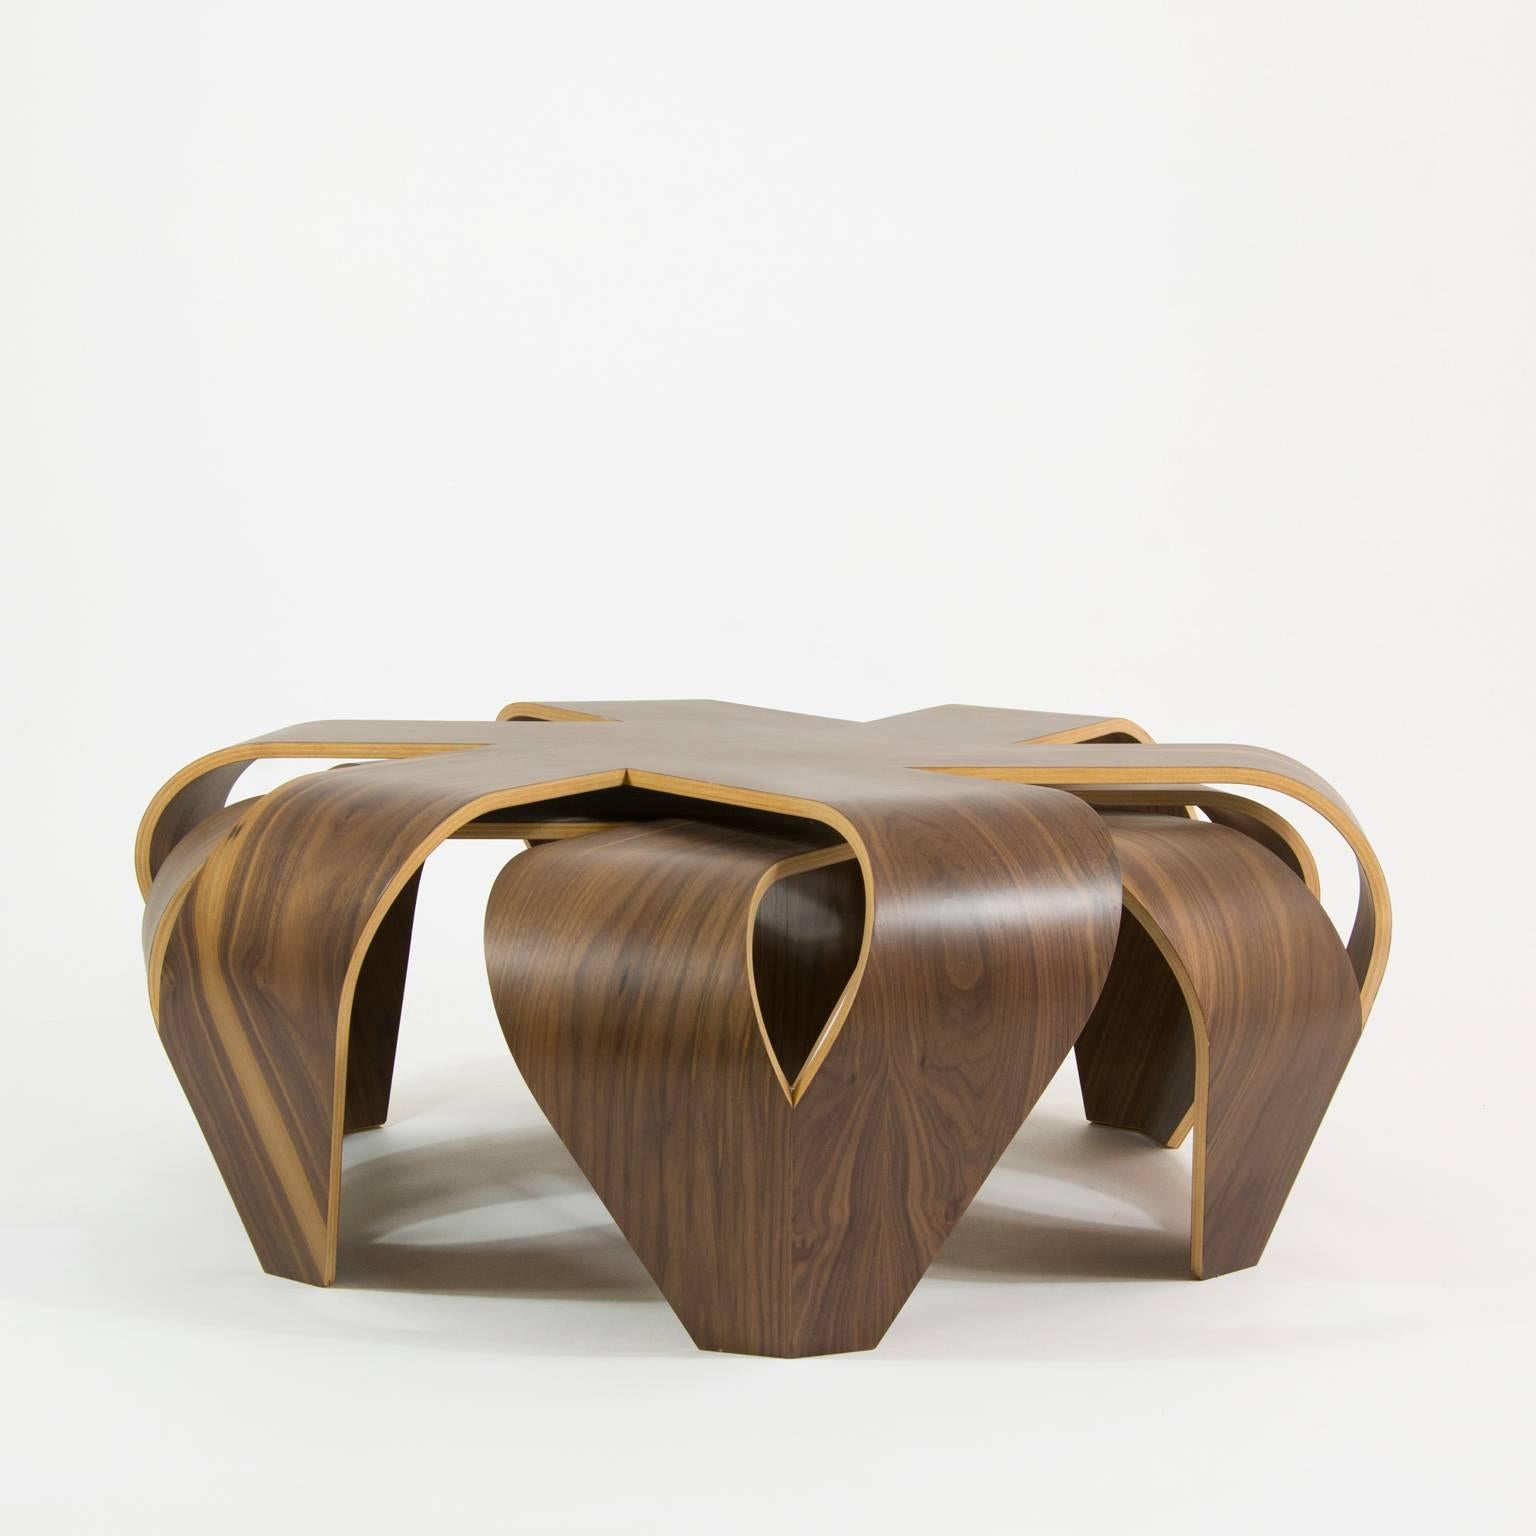 Inspired in the unique hairstyles found in Mexico and created with a wood bending technique developed by LEFT, Victor Aleman designed this beautiful coffee table that creates a great centerpiece for any living room called 